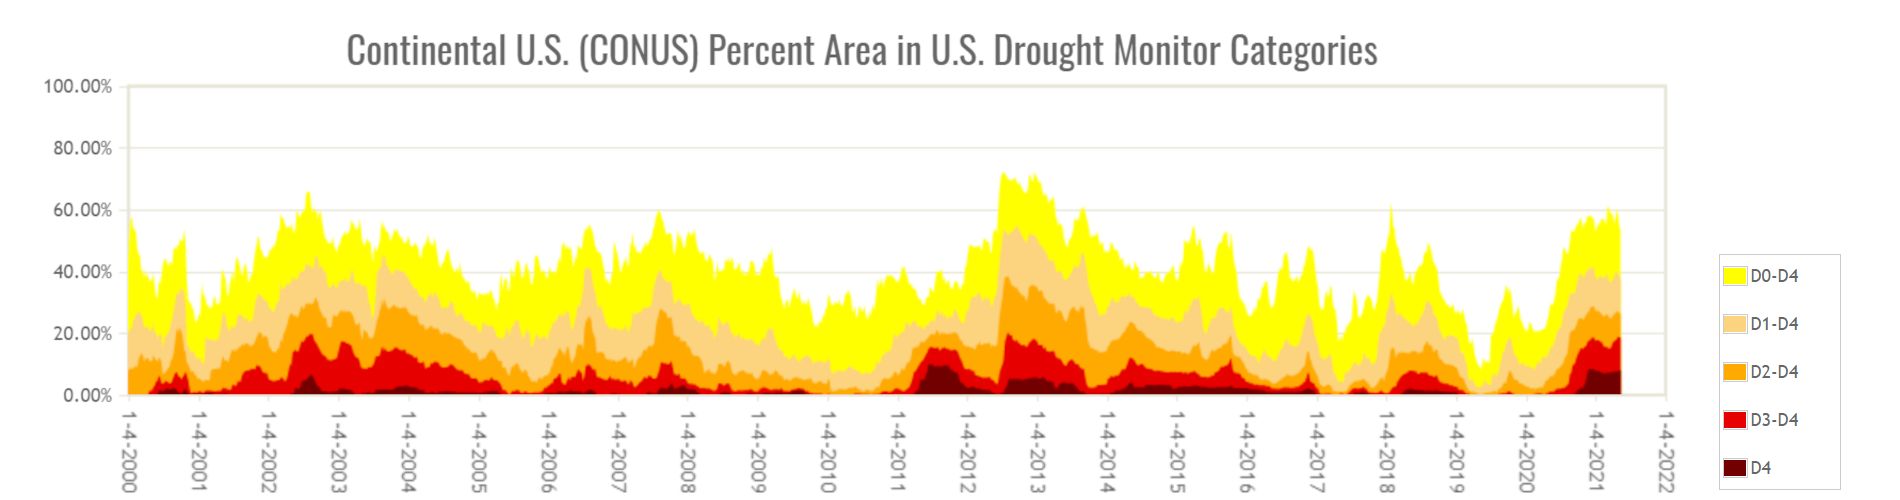 drought conditions over the years